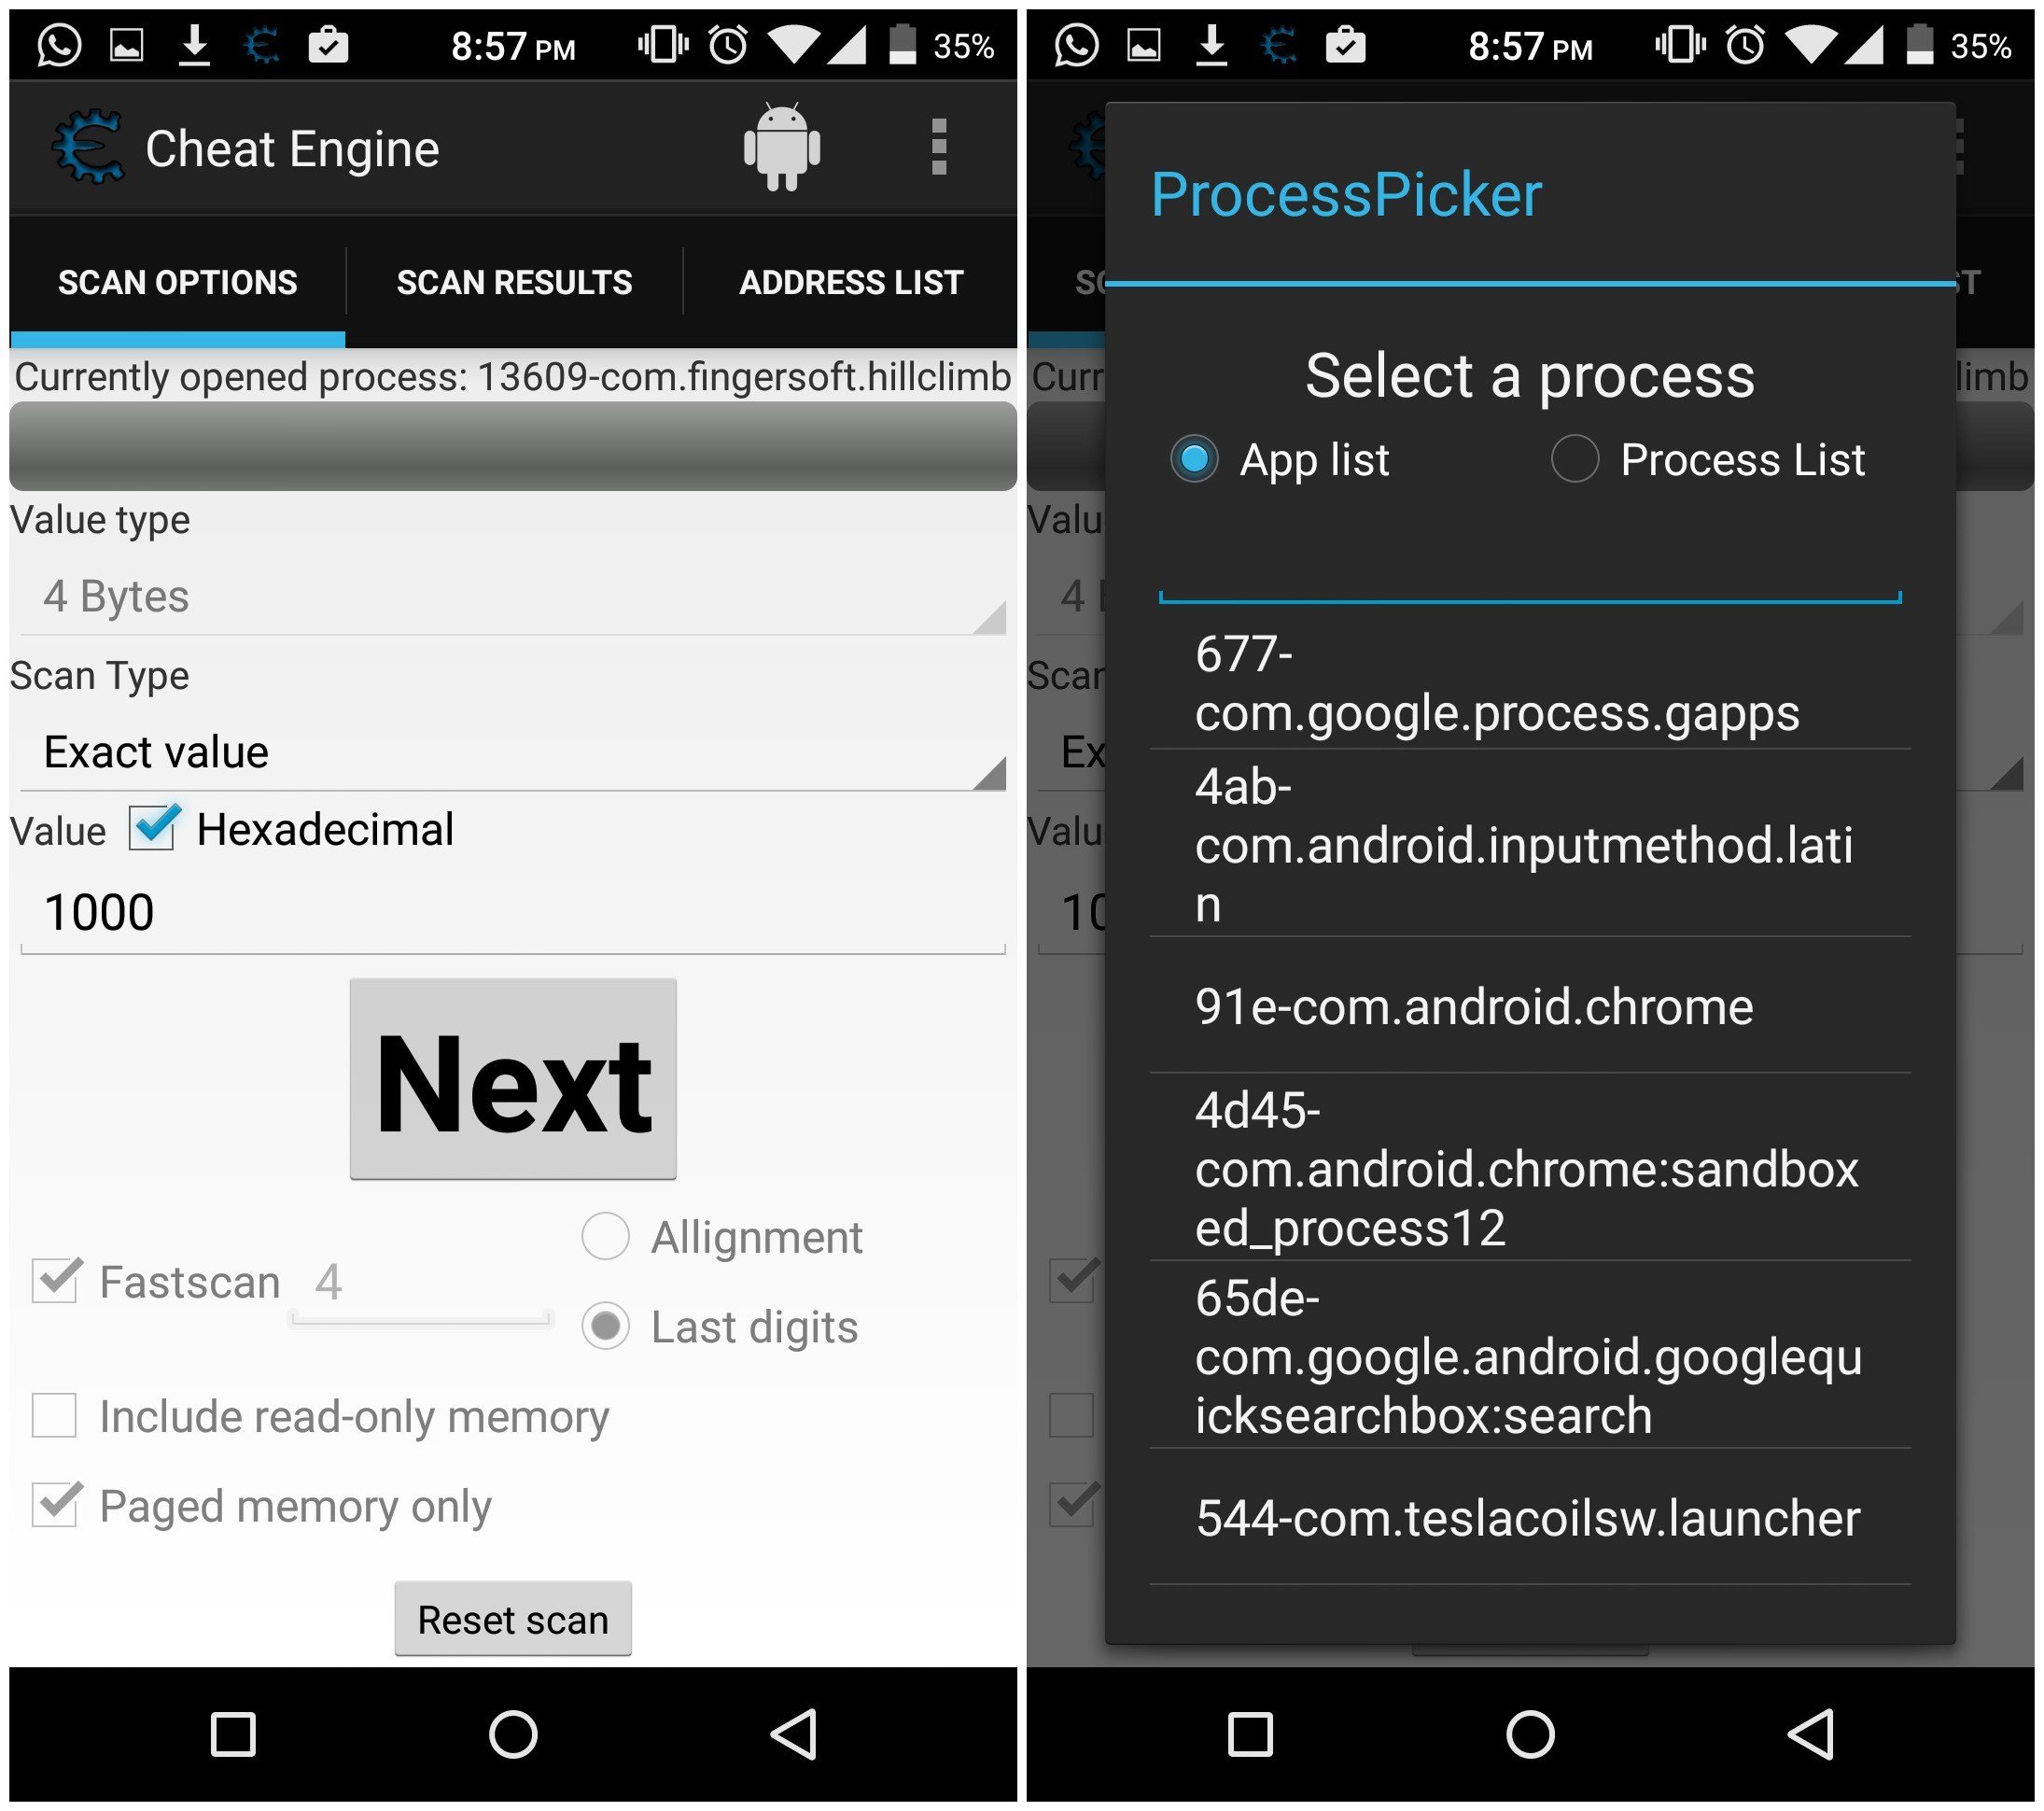 Cheat Engine v1.5.8.01 Pro APK for Android